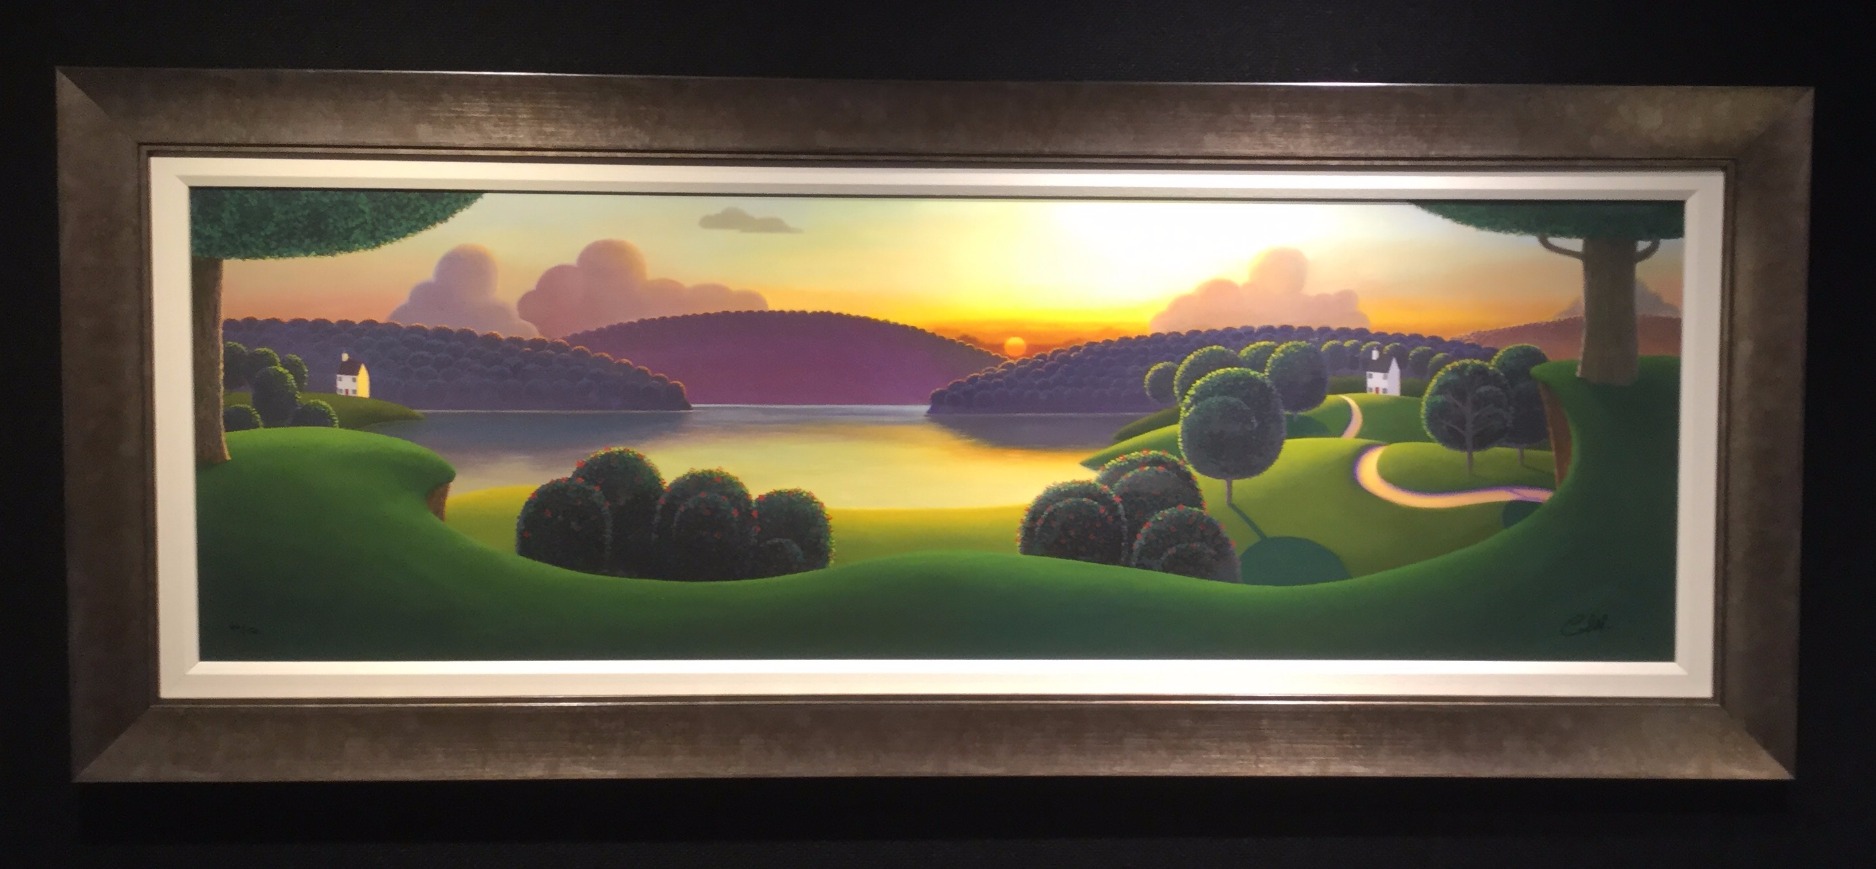 The Great Outdoors by Paul Corfield, Sea | Water | Landscape